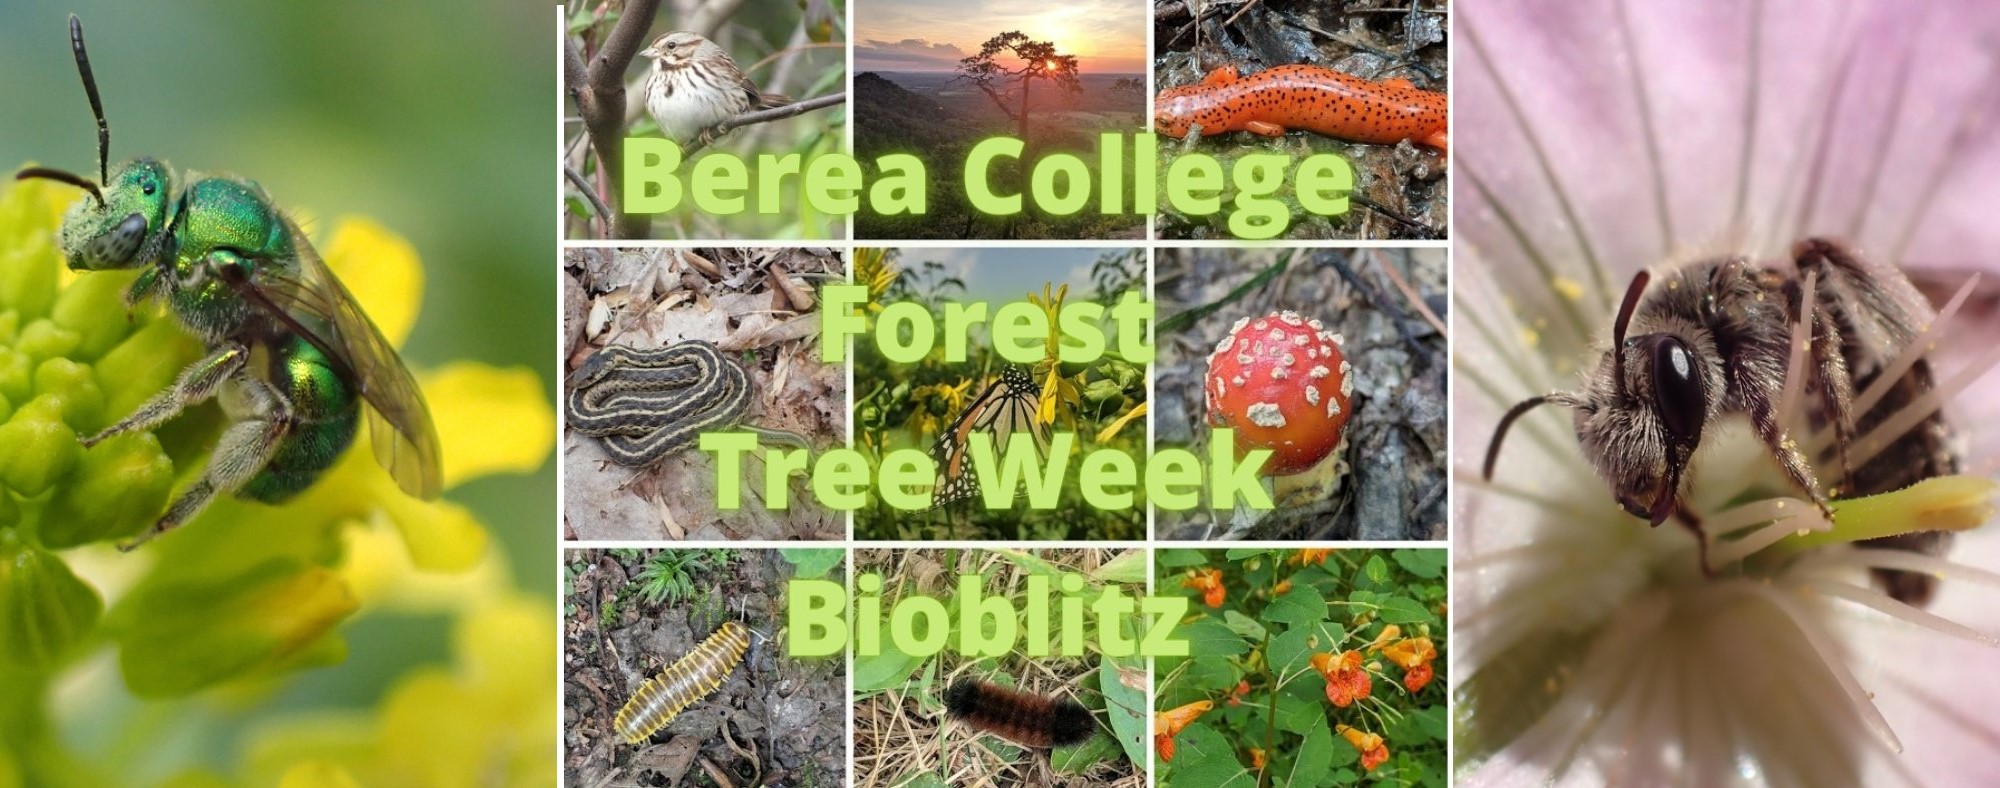 A promotional image for campus-wide competition to identify as many pollinators as possible during a defined period. The image includes photos of different bees and other animals.